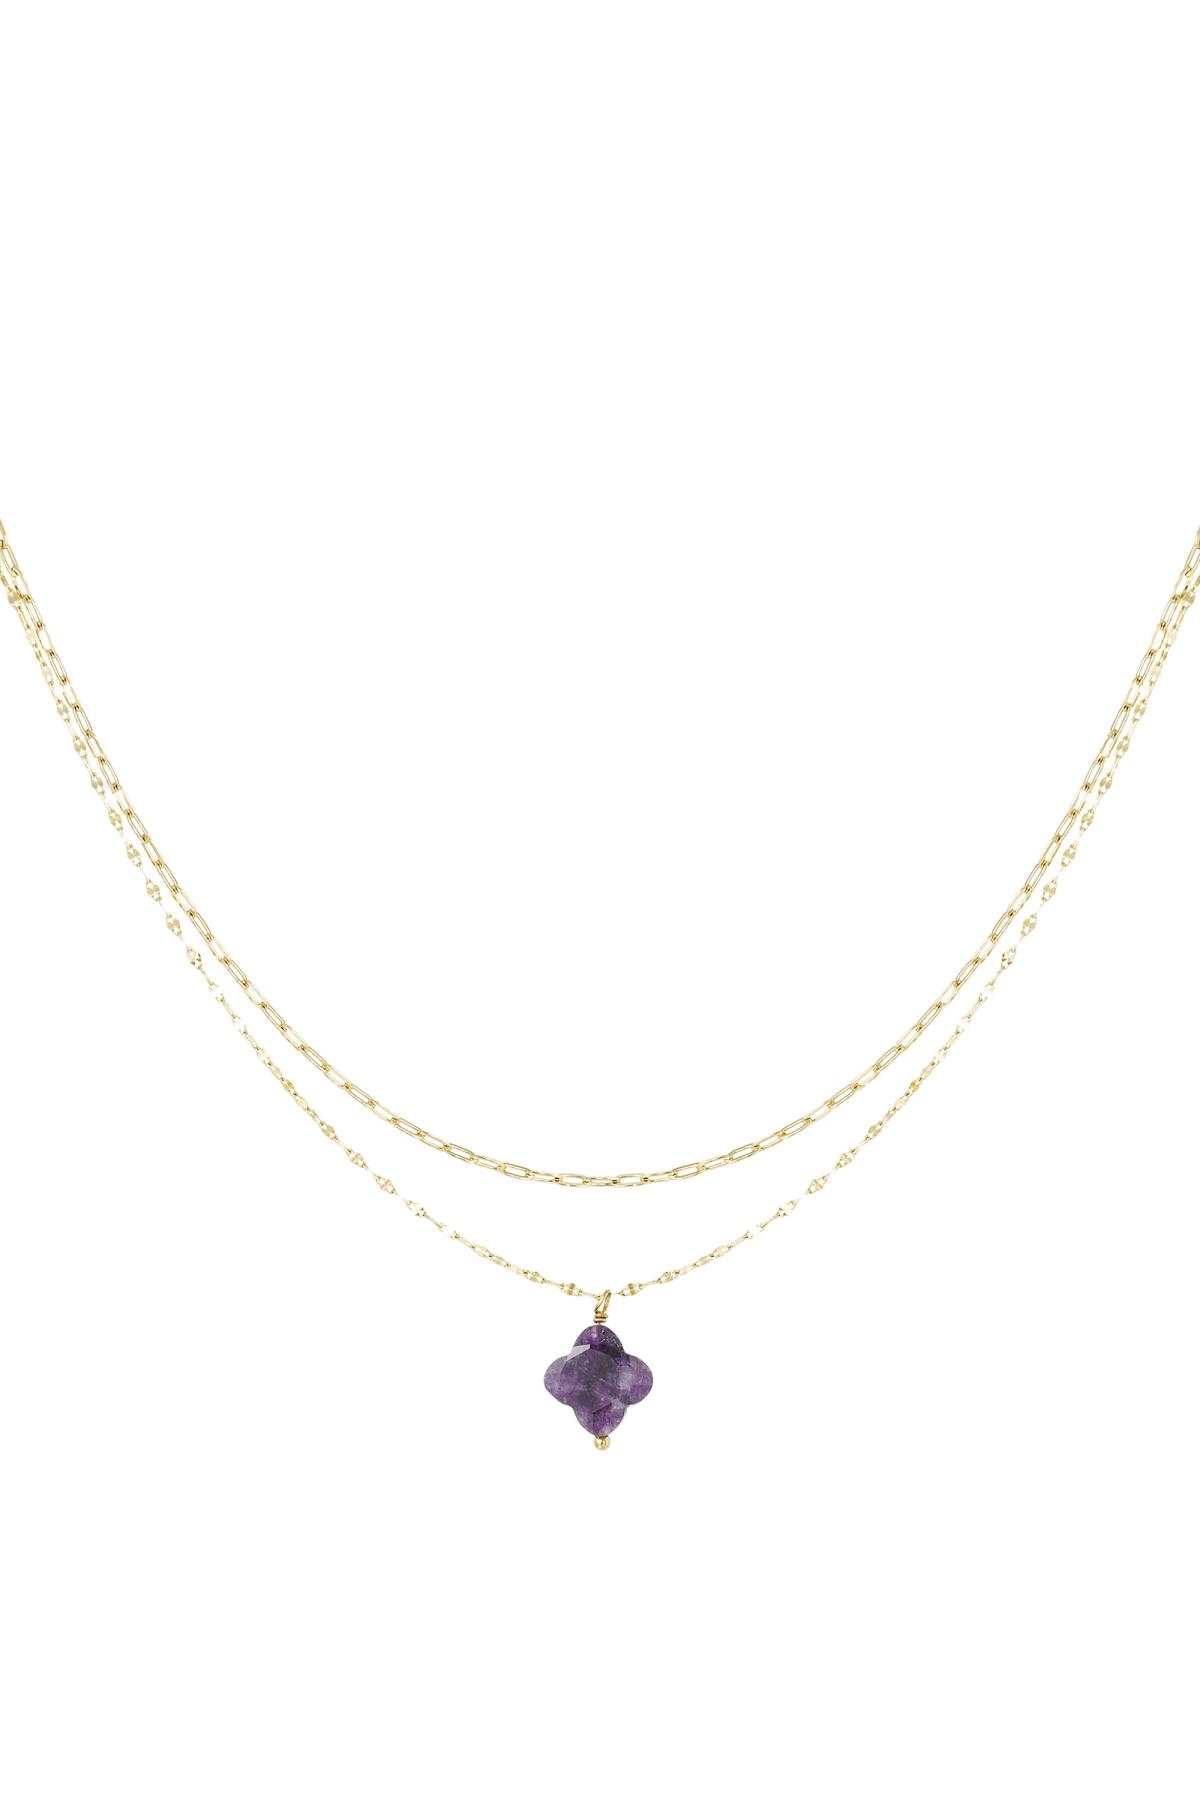 Double necklace with clover pendant - Natural stones collection Purple Stainless Steel